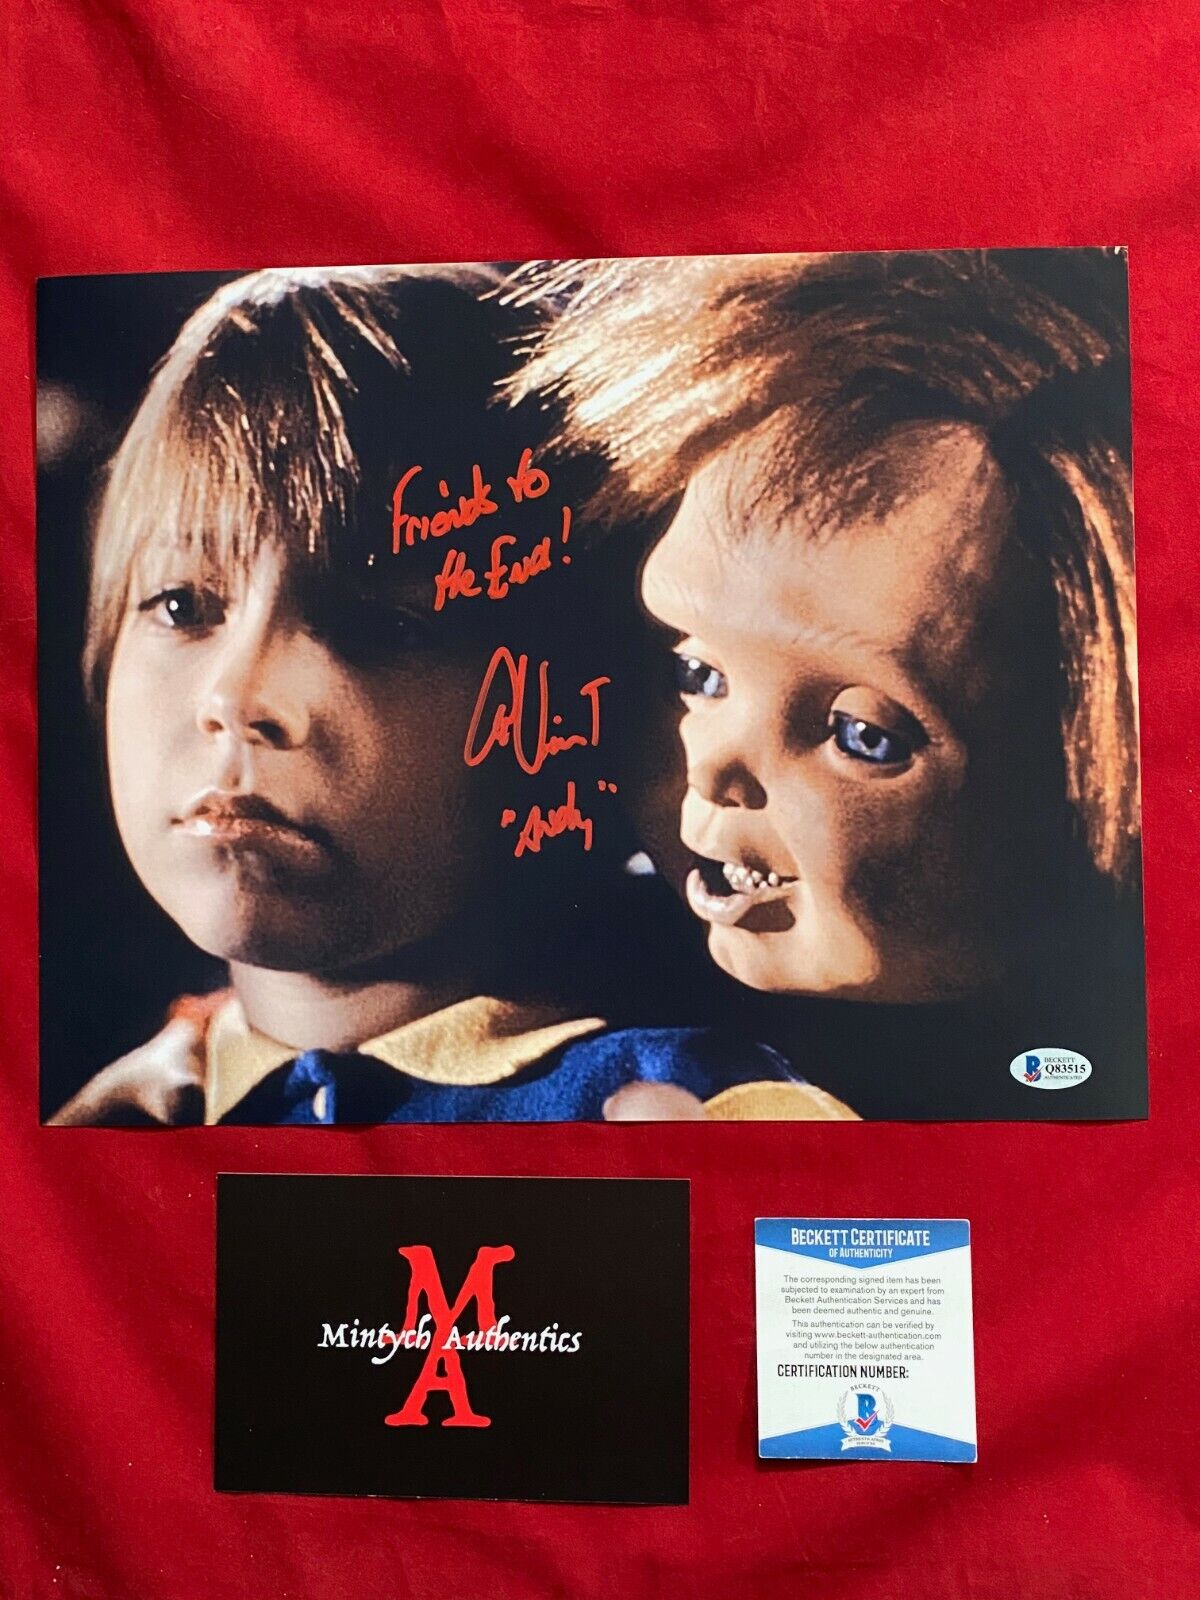 ALEX VINCENT AUTOGRAPHED SIGNED 11x14 Photo Poster painting! CHILD'S PLAY! ANDY! BECKETT COA!